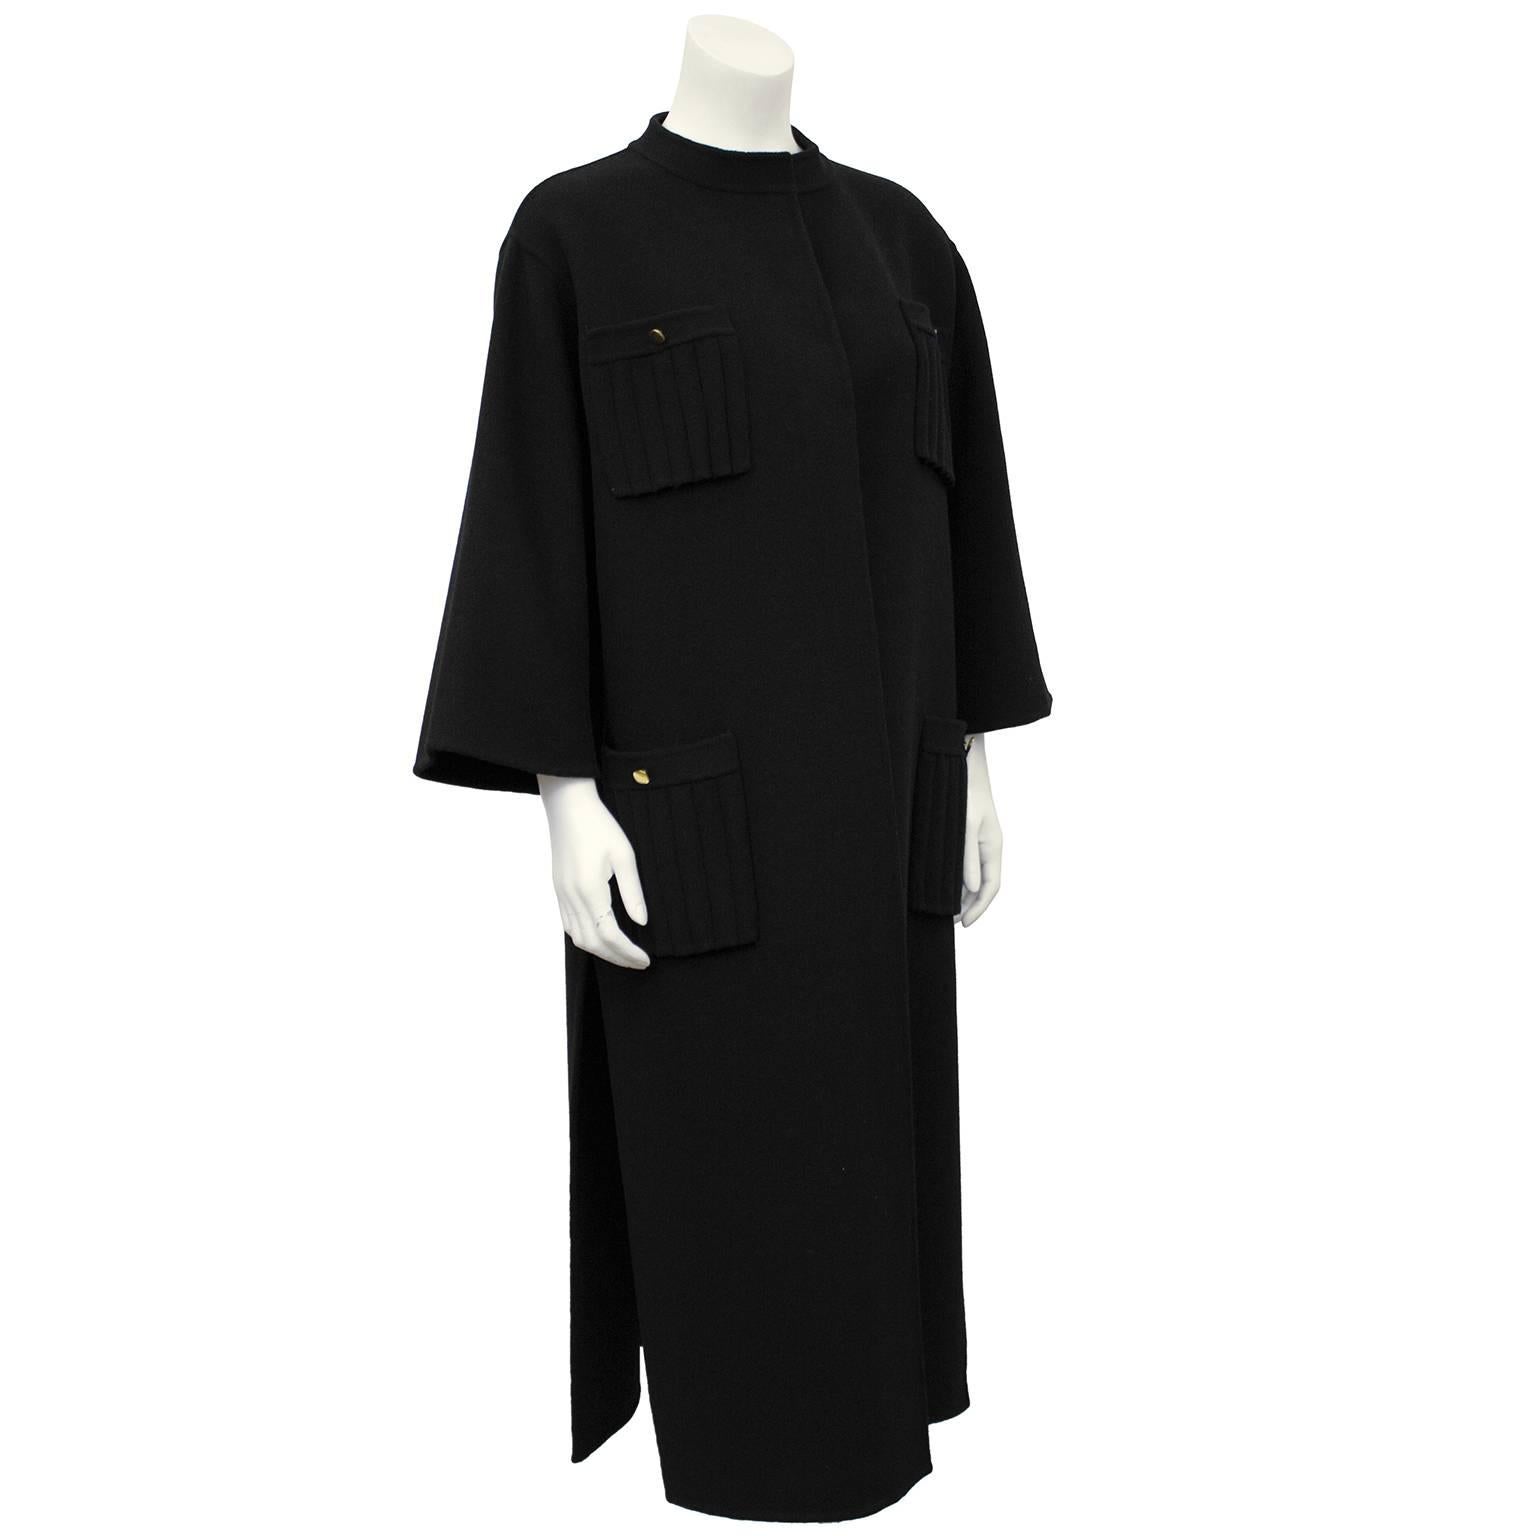 Beautiful unlined black felted wool coat dating from the 1970's. Four ribbed patch pockets on hips and lower bust with gold button details. Sits open on the body, with no buttons down front. Elegant openings  up both left and right sides seams.